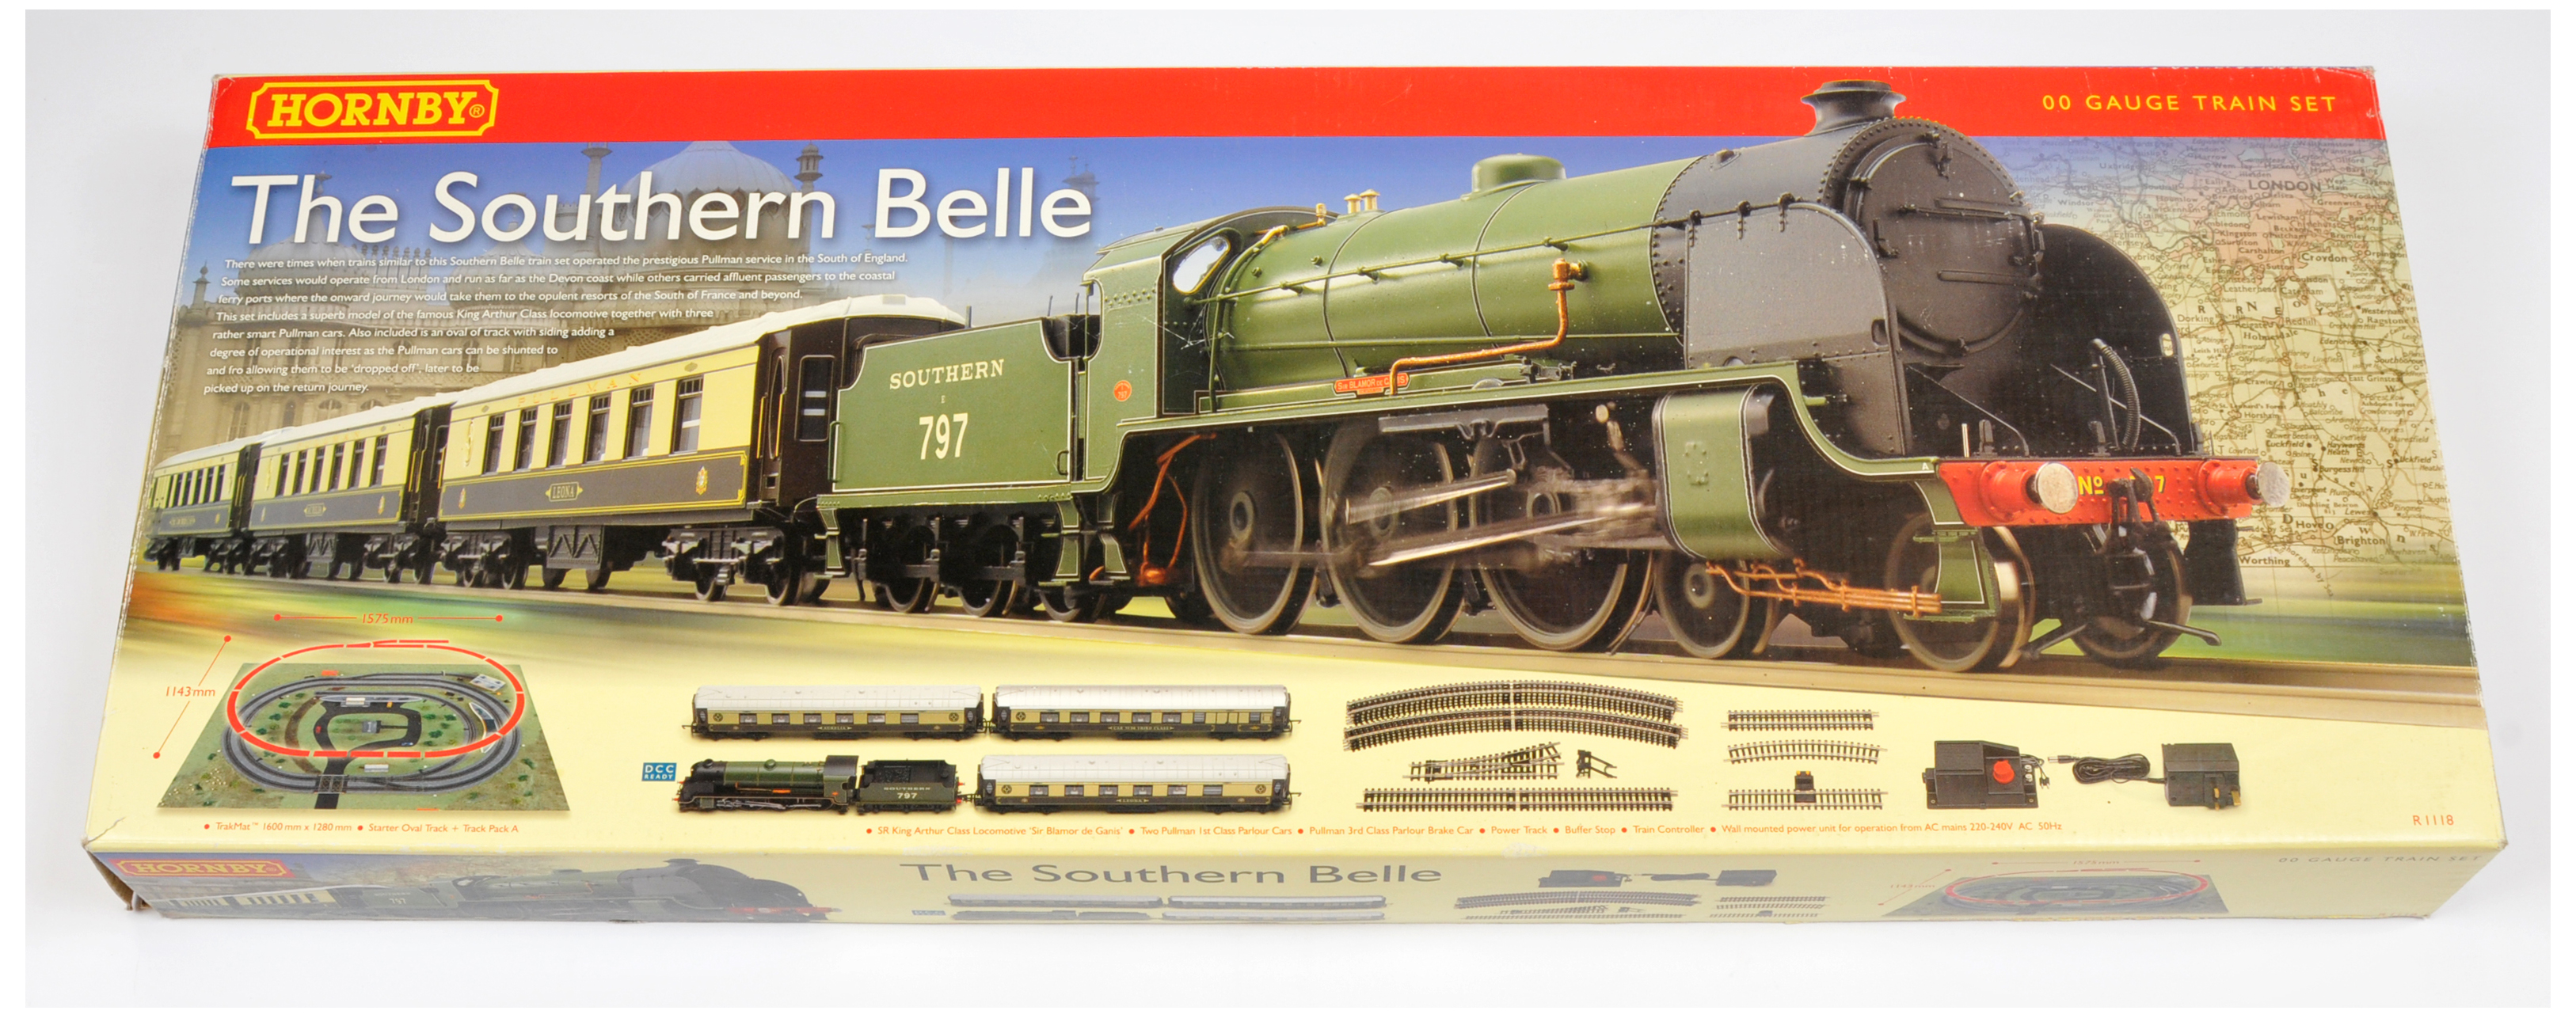 Hornby (China) R1118 (Limited Edition) "The Southern Belle" Train Set